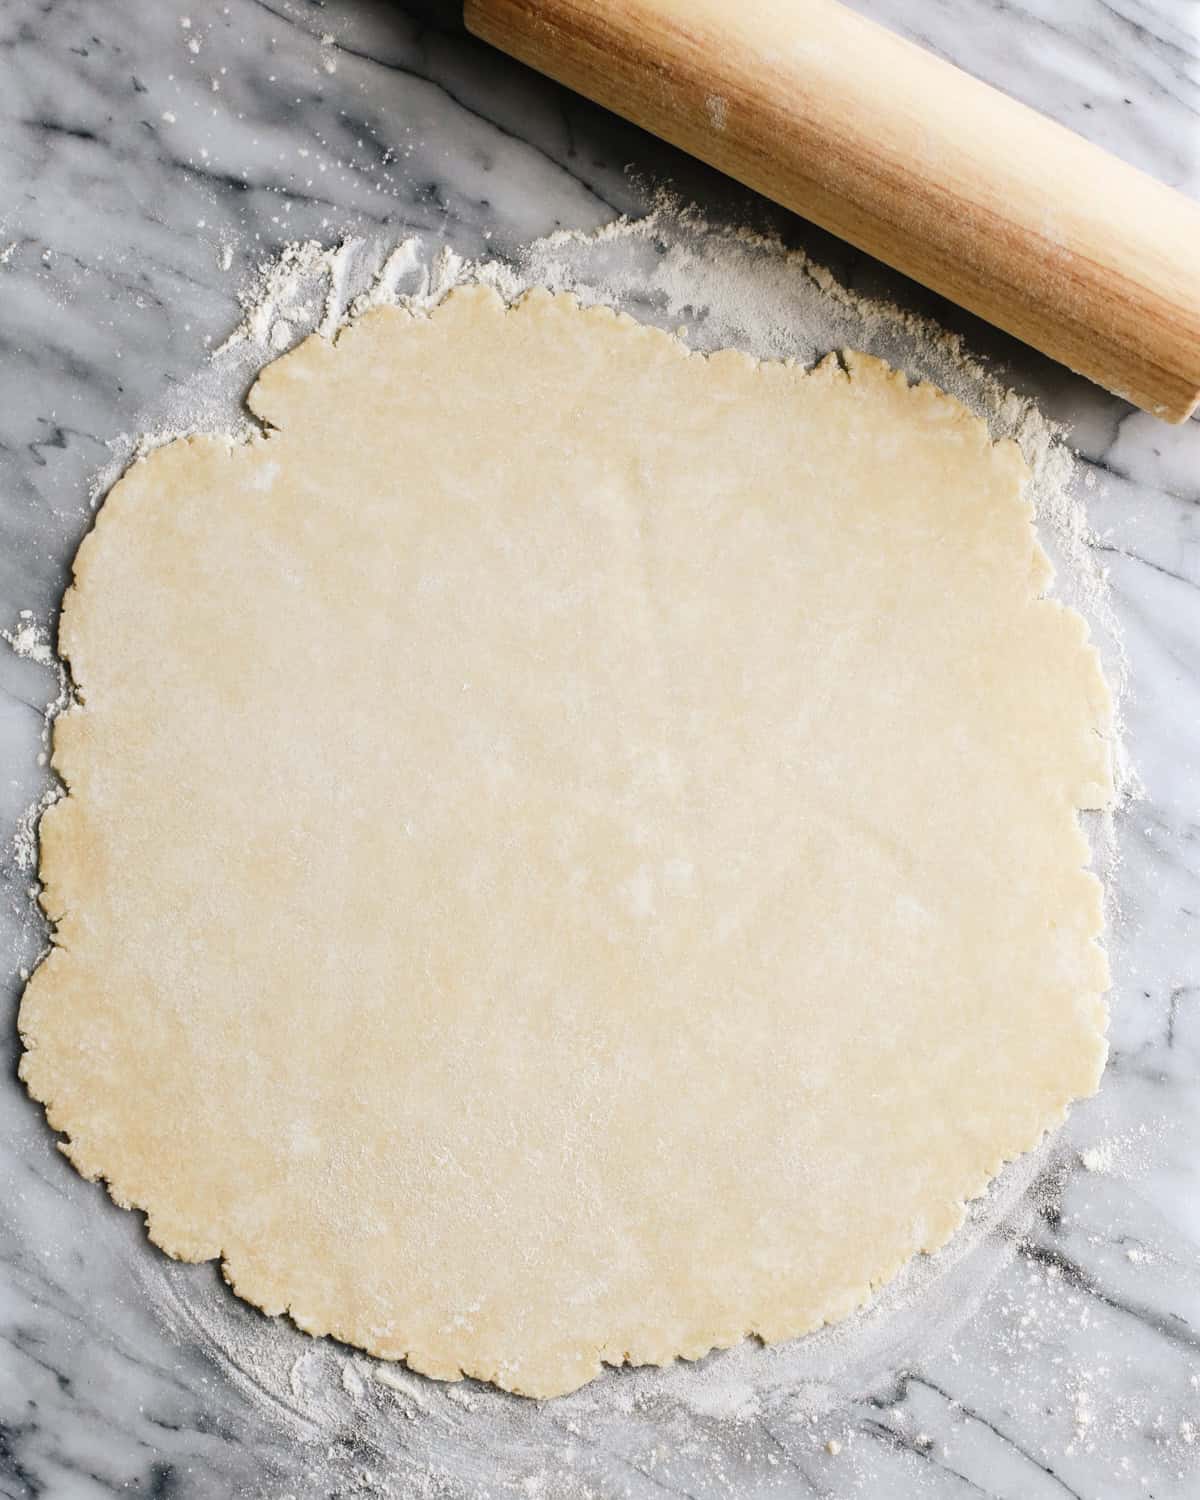 How to Make Peach Pie Crust - dough rolled out into a circle